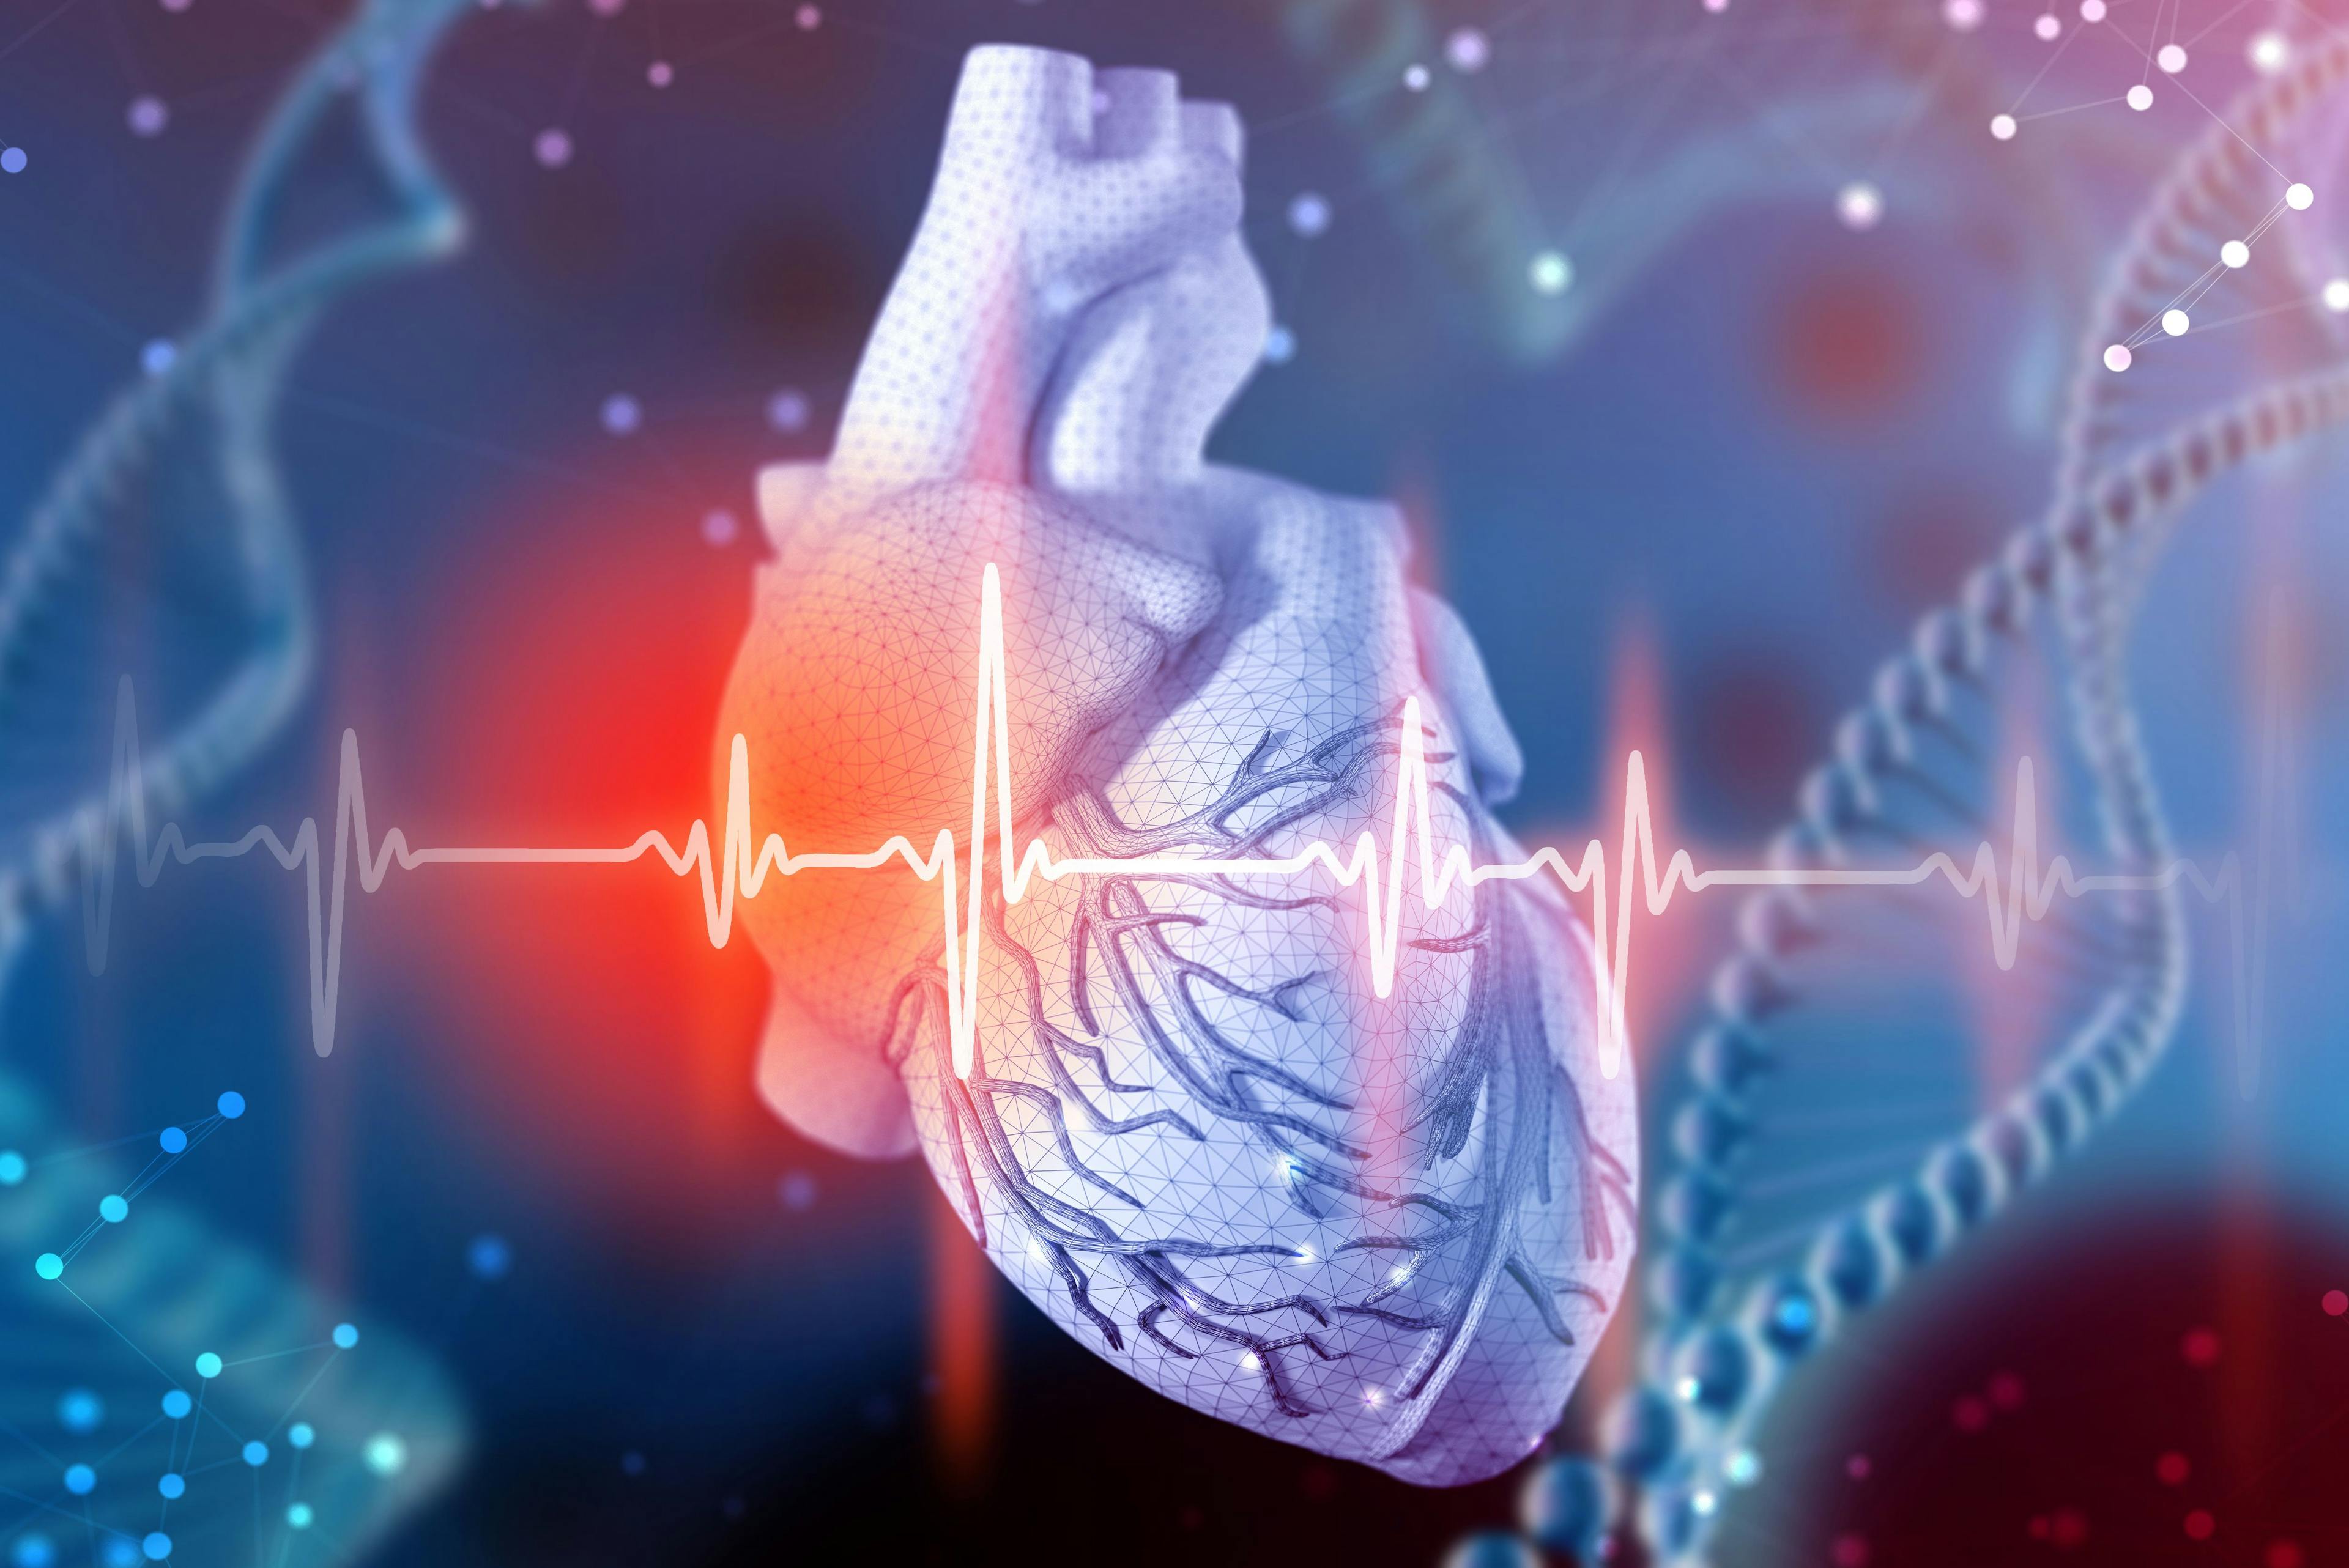 Cardiometabolic Risk Factors May Impact Survival in Postmenopausal Women with Cancer